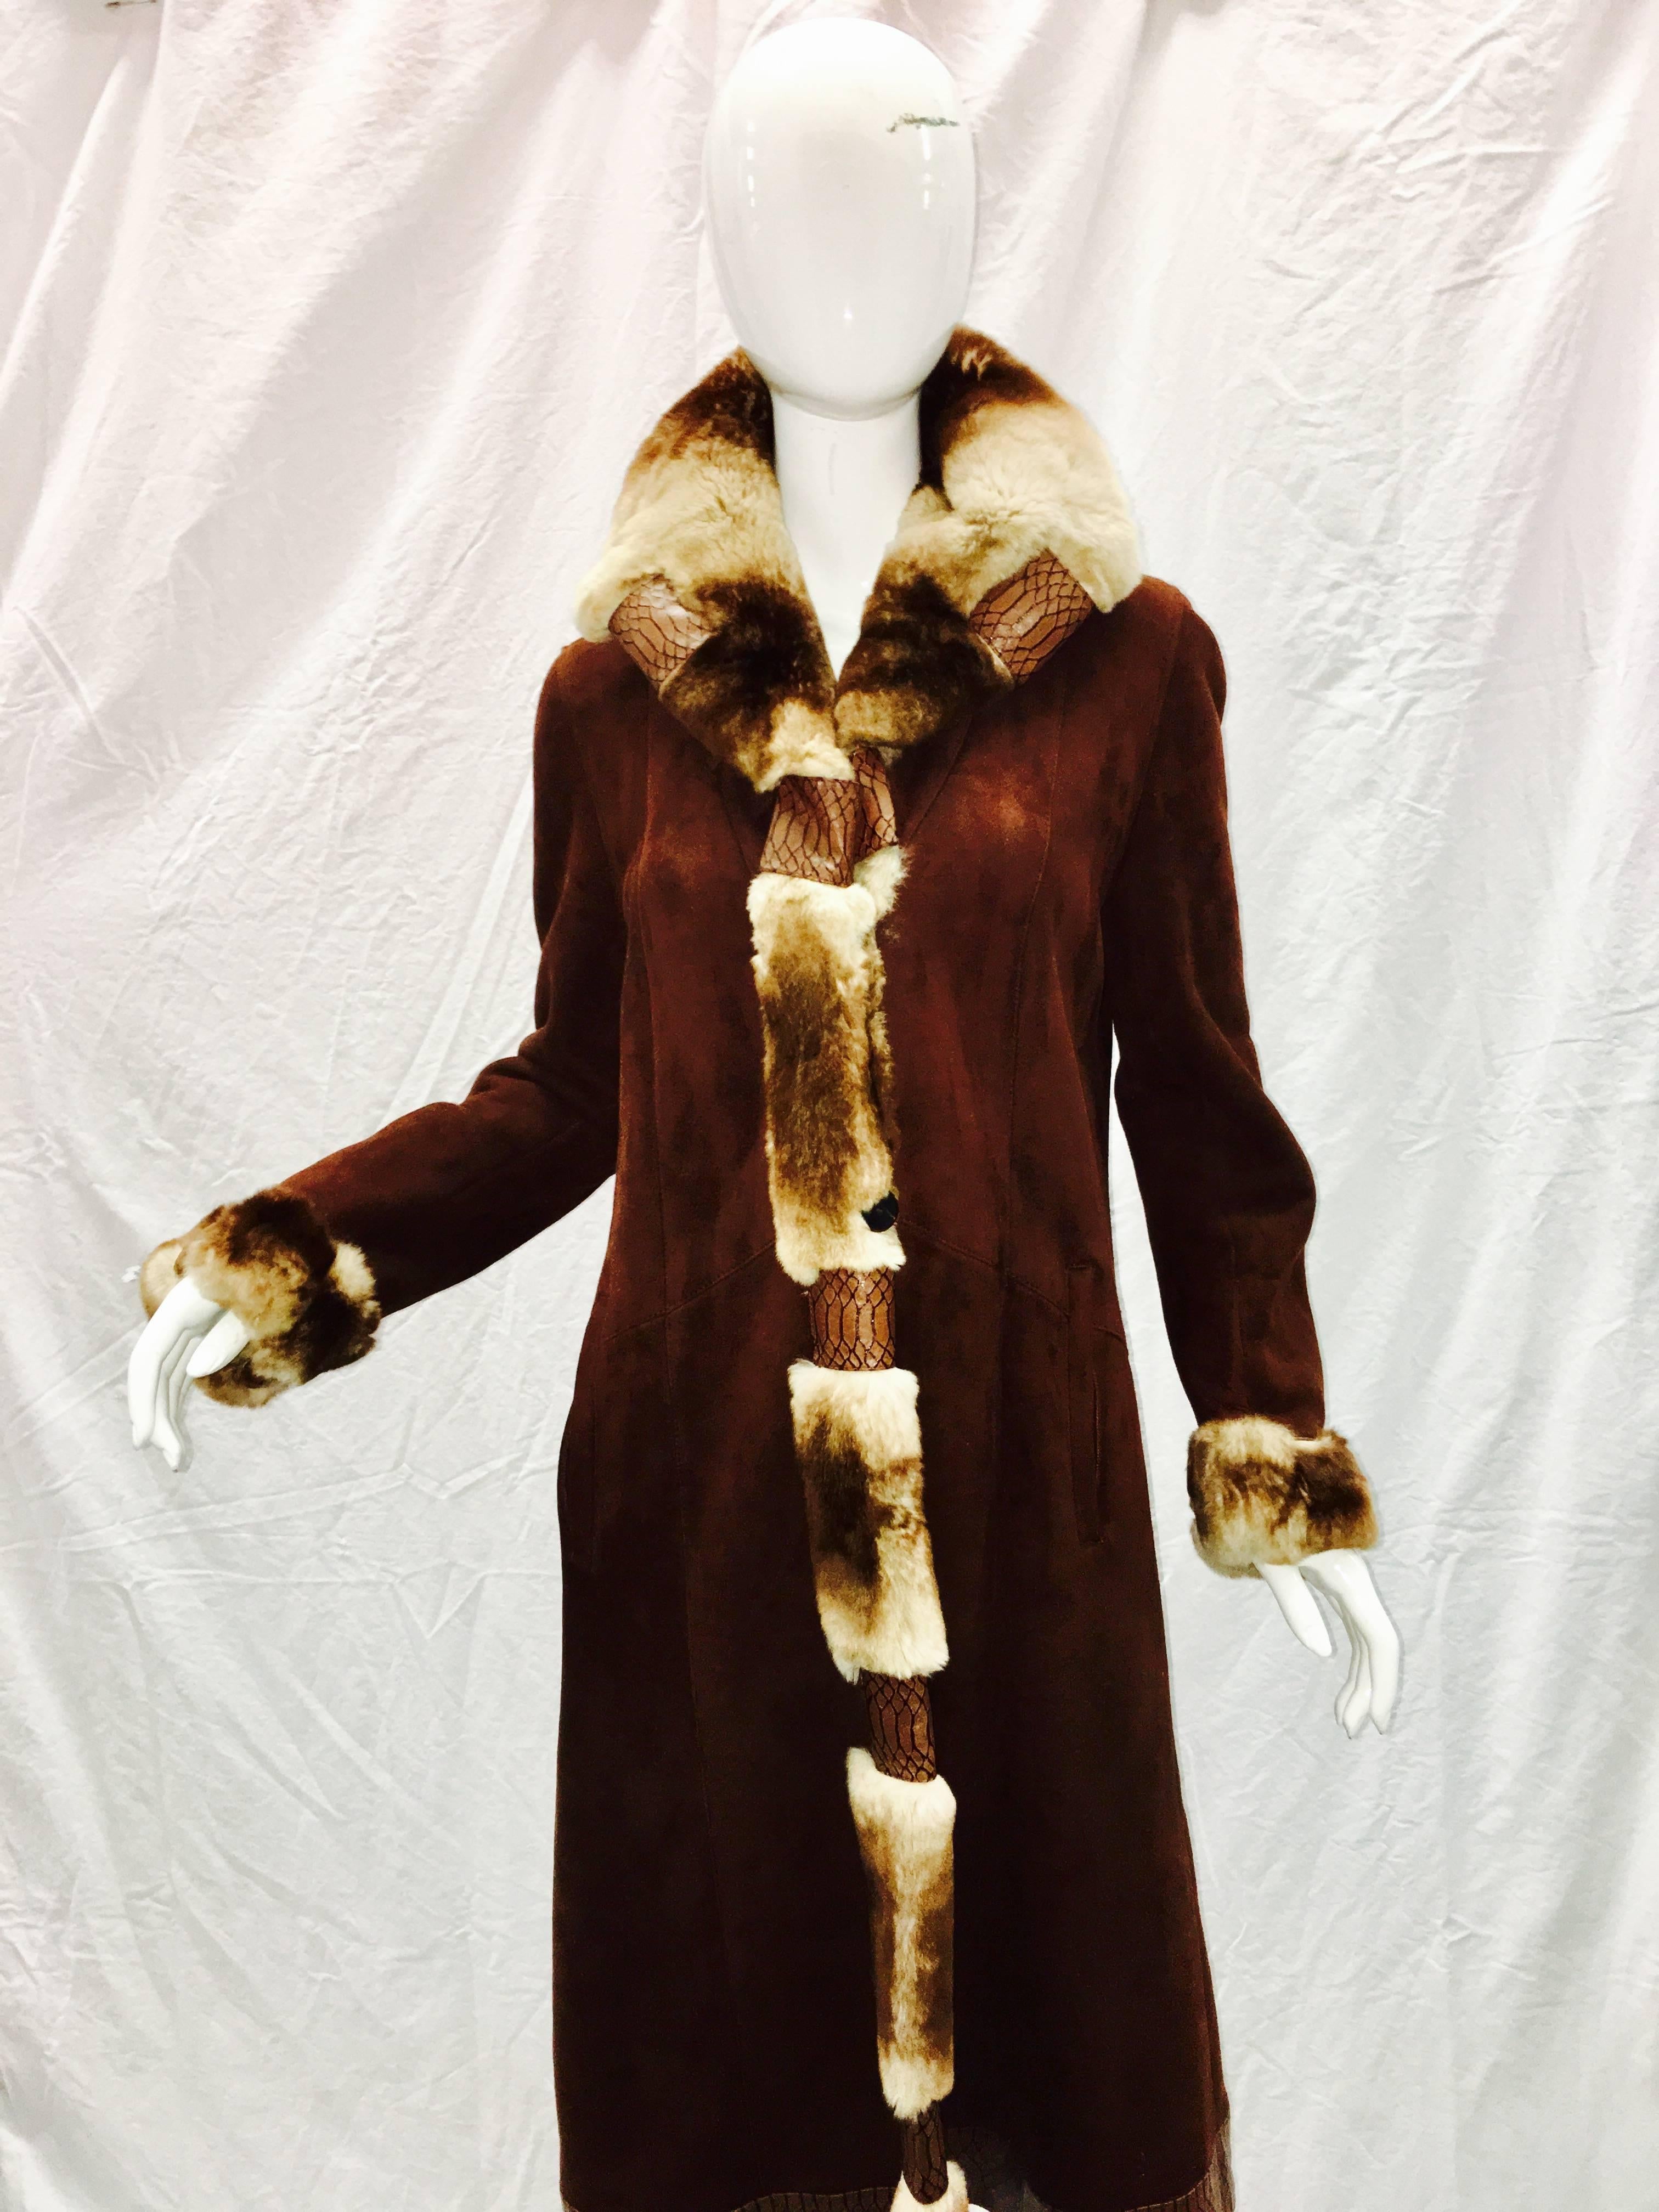  Custom made in Italy Stunning light weight brown Genuine  shearling trimmed in soft Rex rabbit and python embossed leather. Very chic and modern. Size 6/ 8 bust 38" sleeves 26" length 48".  Paid over $2800 Pristine condition Like